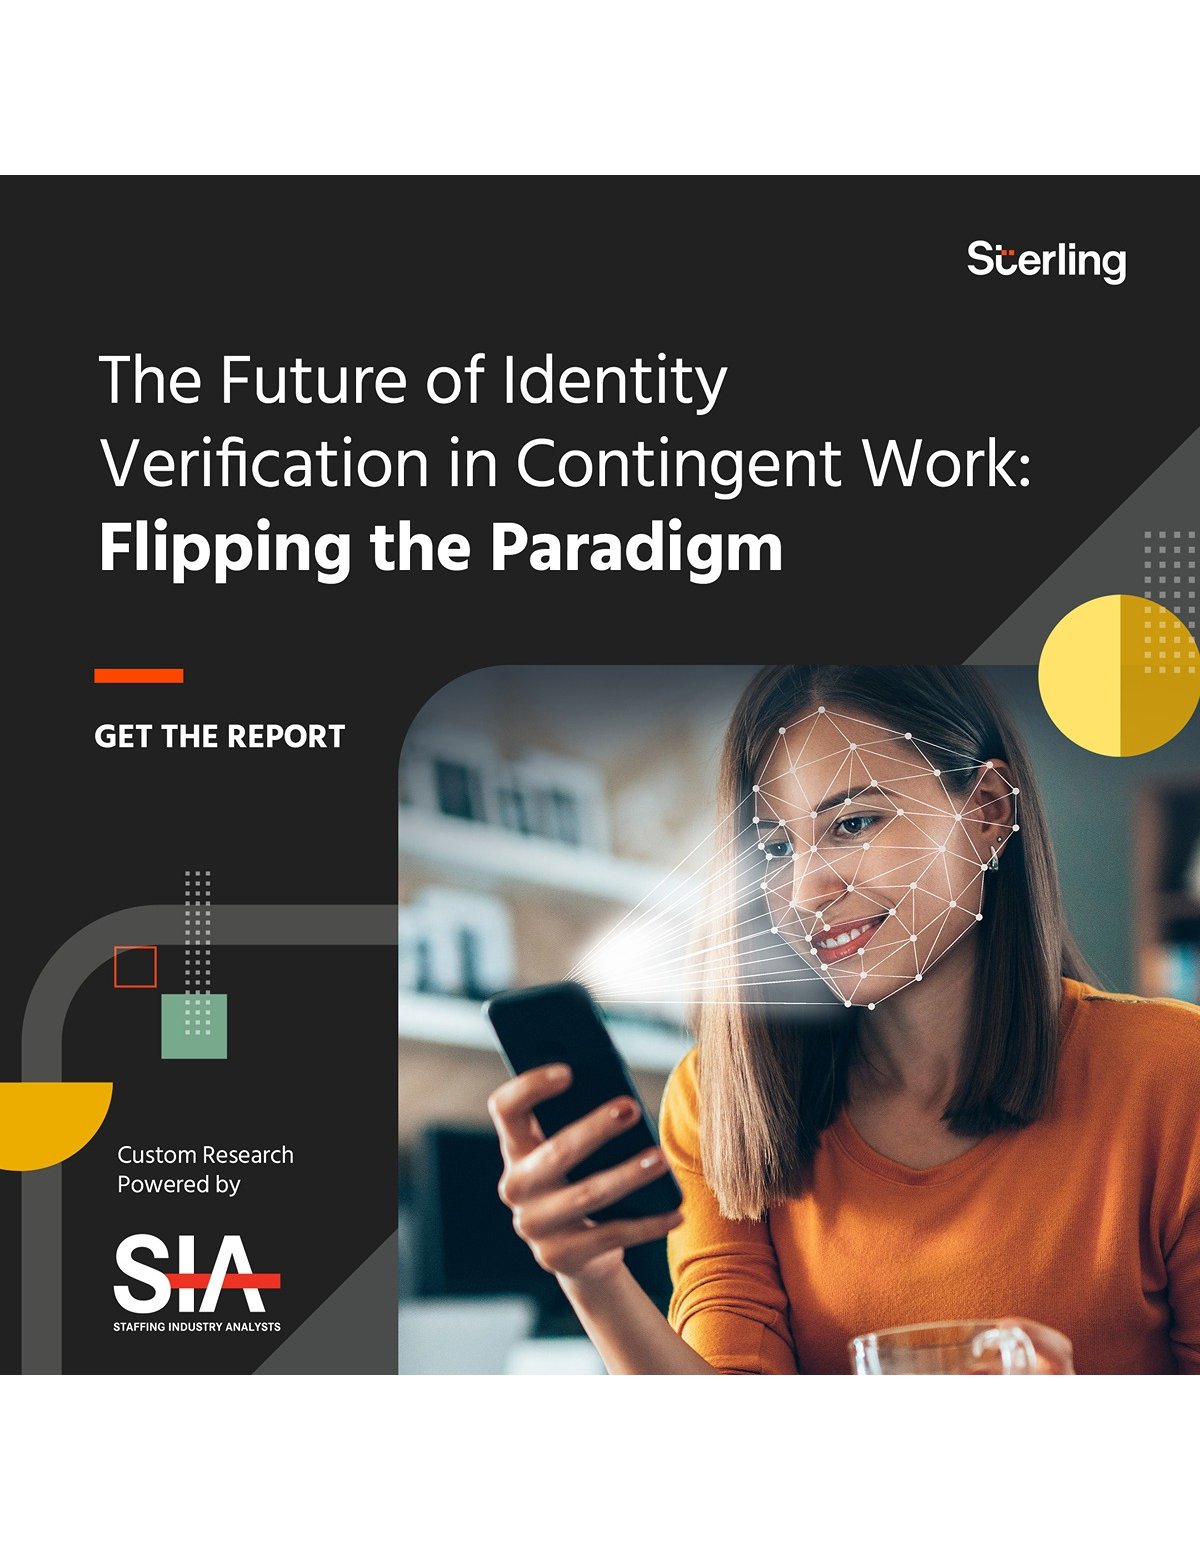 The Future of Identity Verification in Contingent Work: Flipping the Paradigm